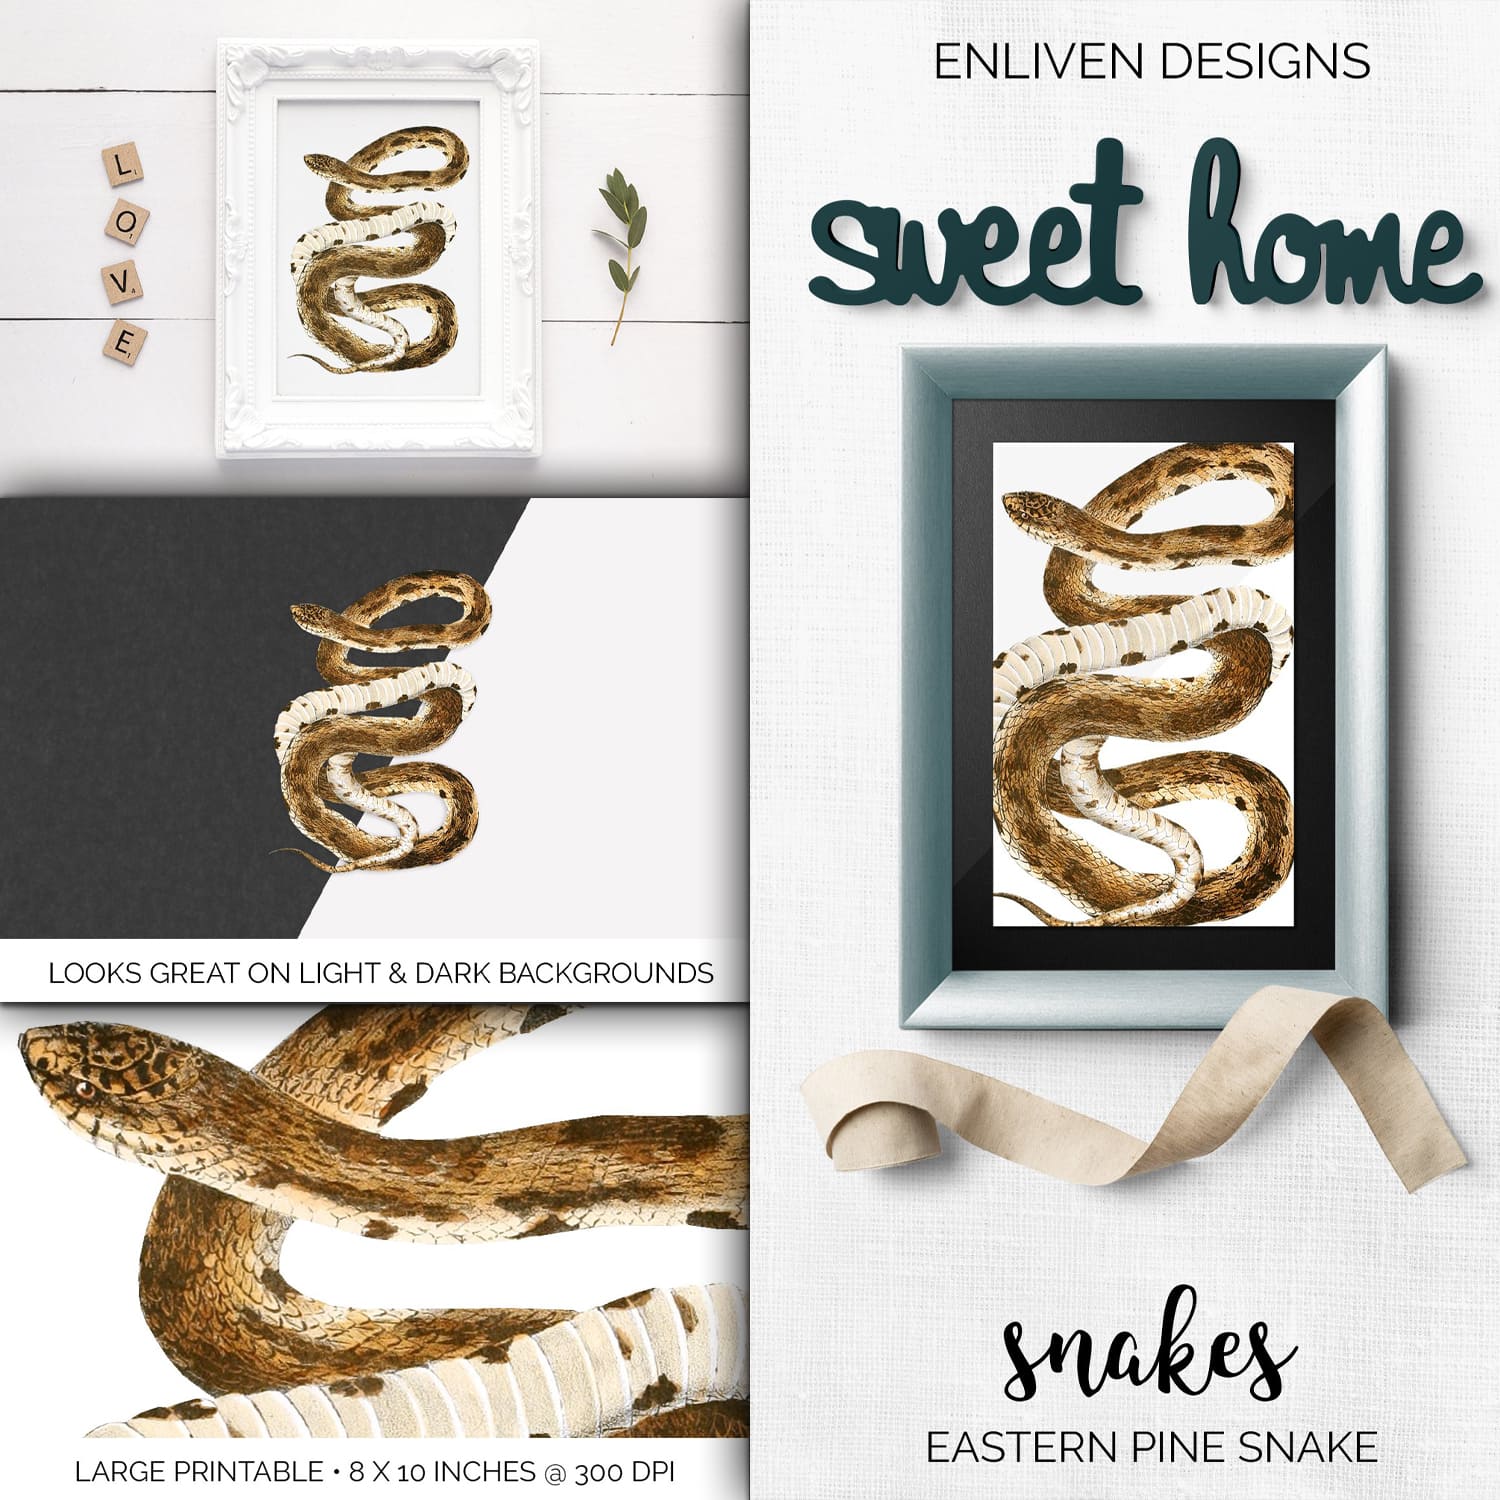 Collection of colorful images eastern pine snake.